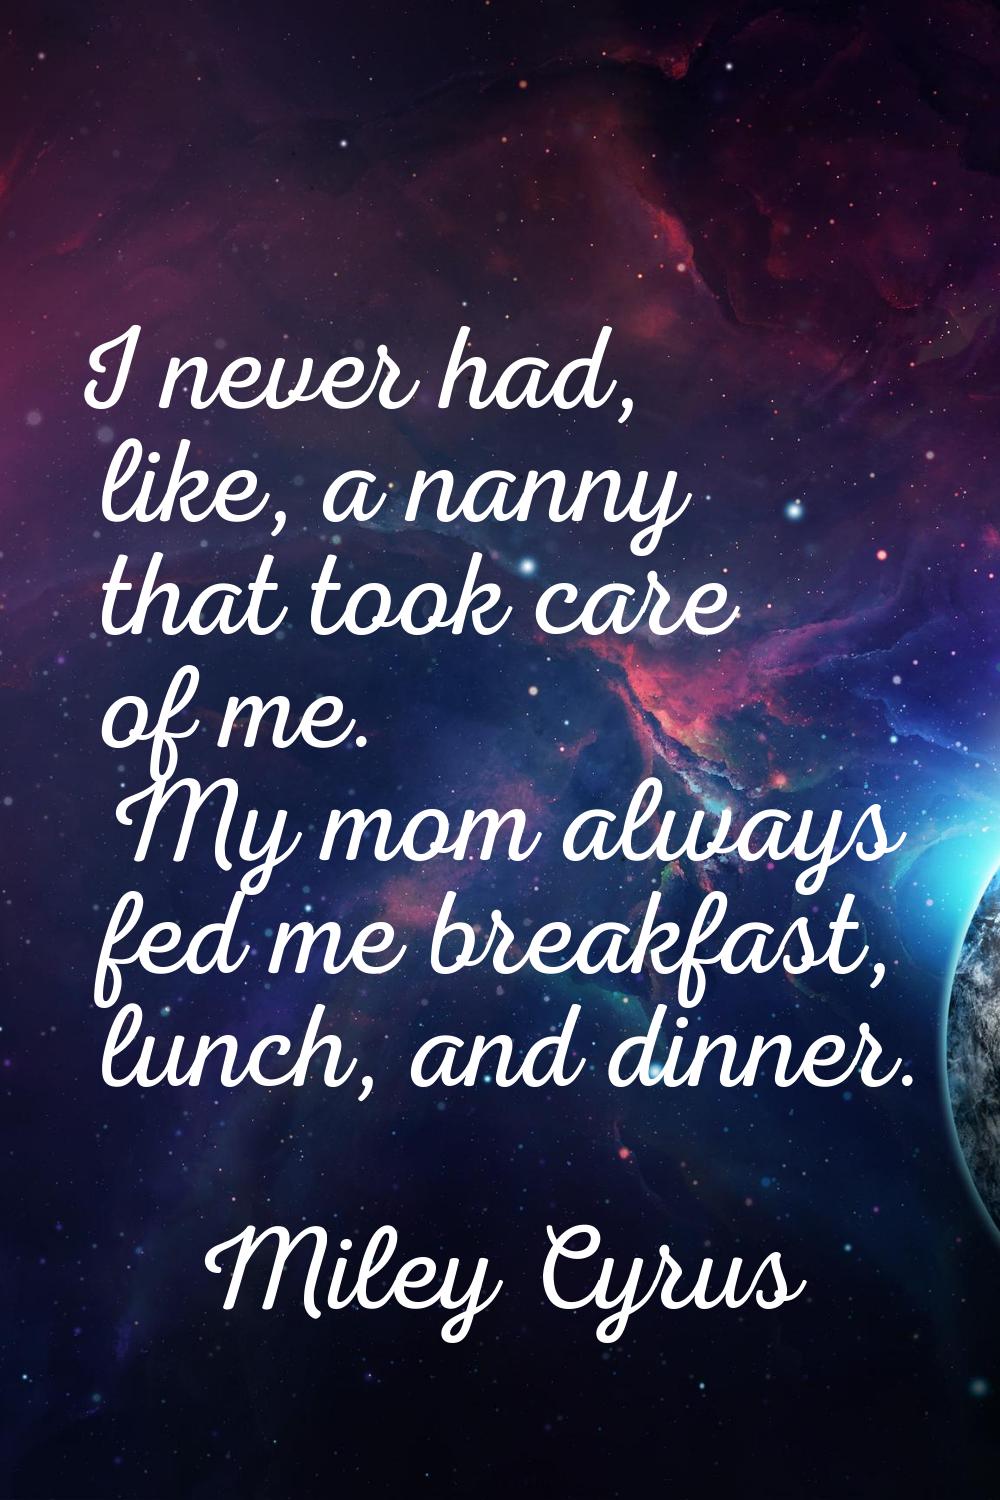 I never had, like, a nanny that took care of me. My mom always fed me breakfast, lunch, and dinner.